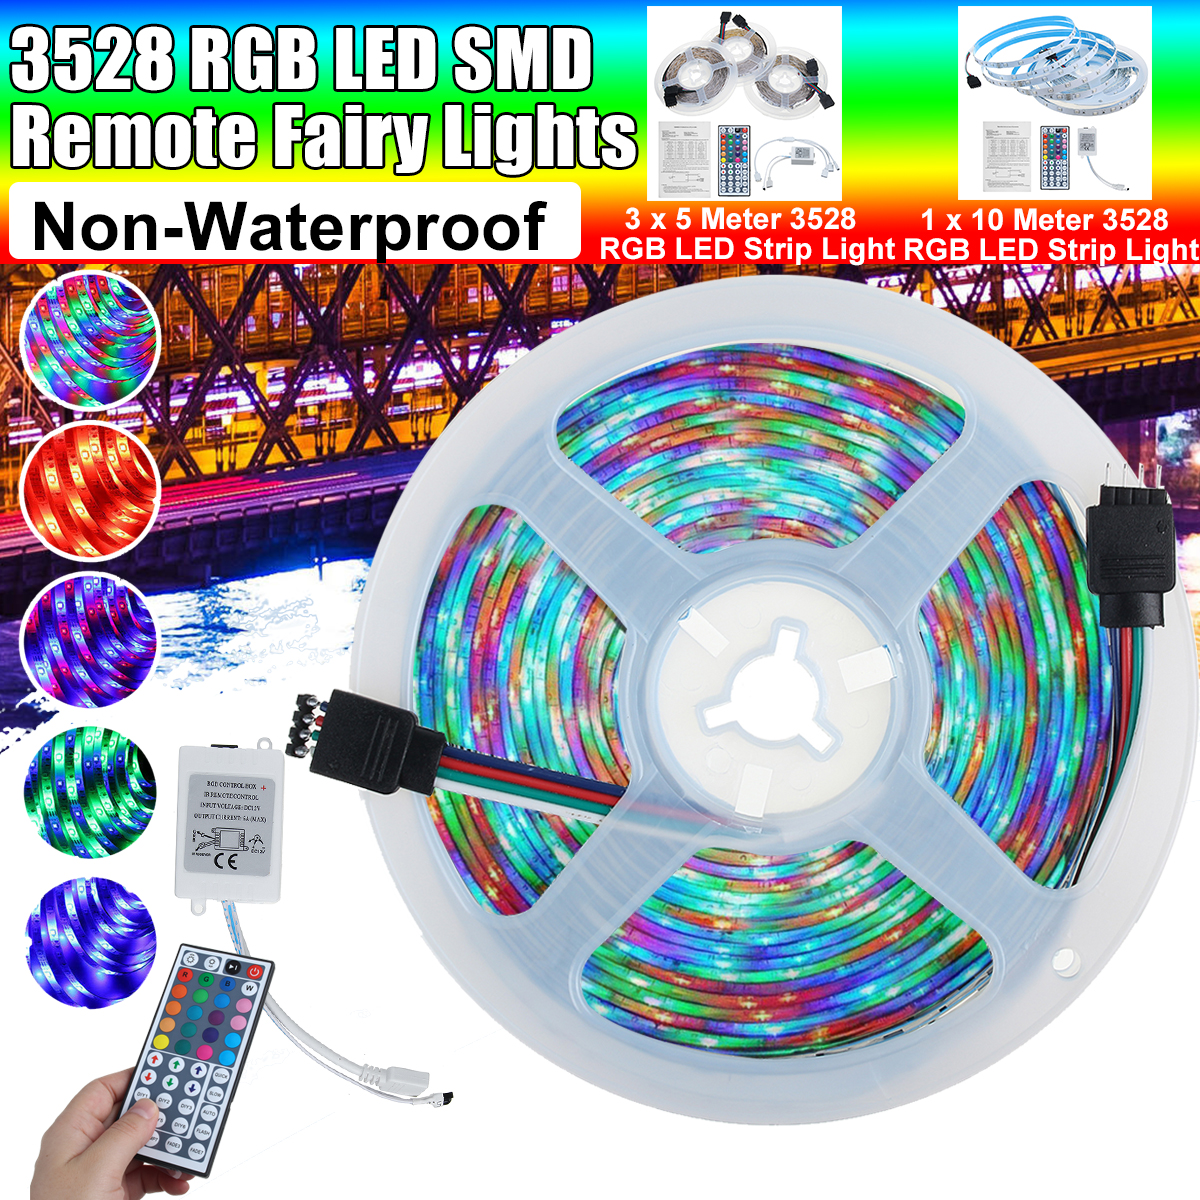 DC12V-3X5M10M-LED-Strip-Light-Non-waterproof-3528-RGB-Tape-Lamp-for-Room-TV-Party-Bar--Remote-Contro-1729474-1